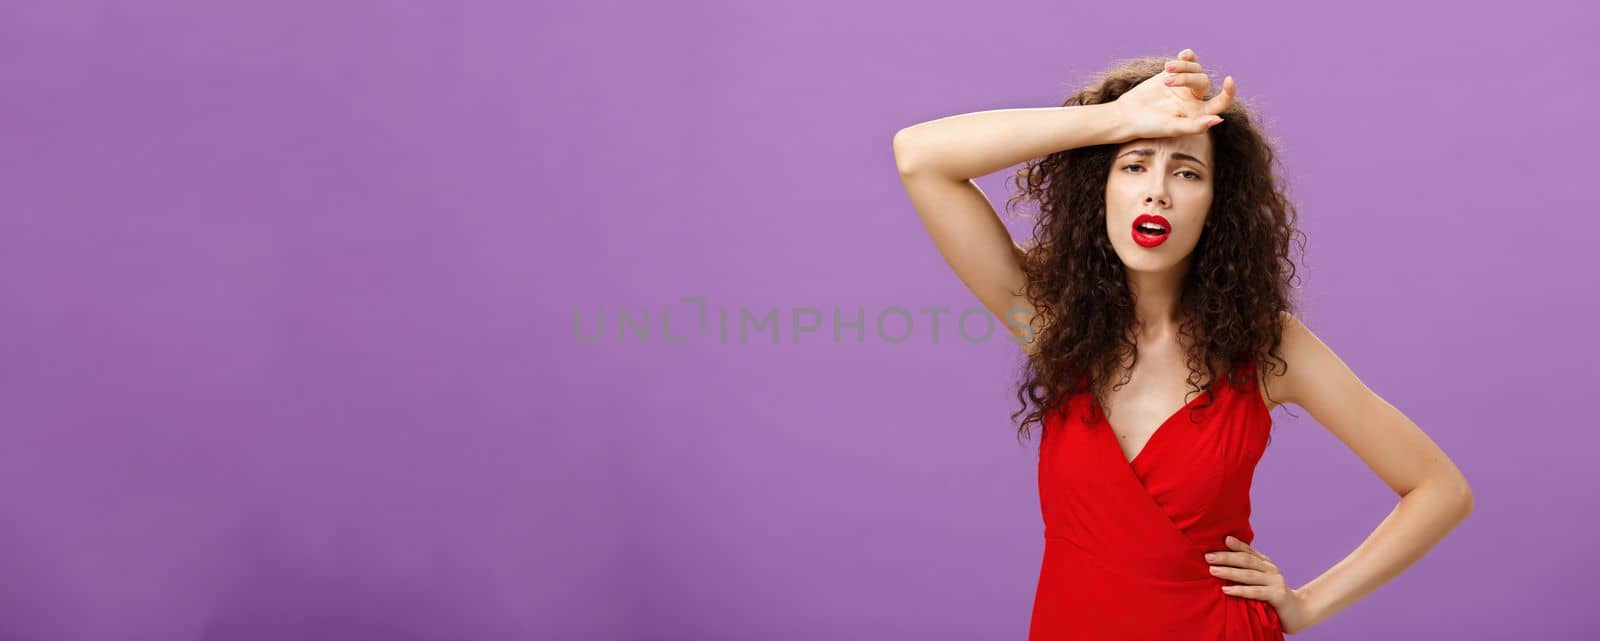 Woman fainting feeling bad whiping sweat of forehead standing drained and exhausted over purple background in red stylish dress expressing gloomy and unhappy feelings wanting some help. Copy space